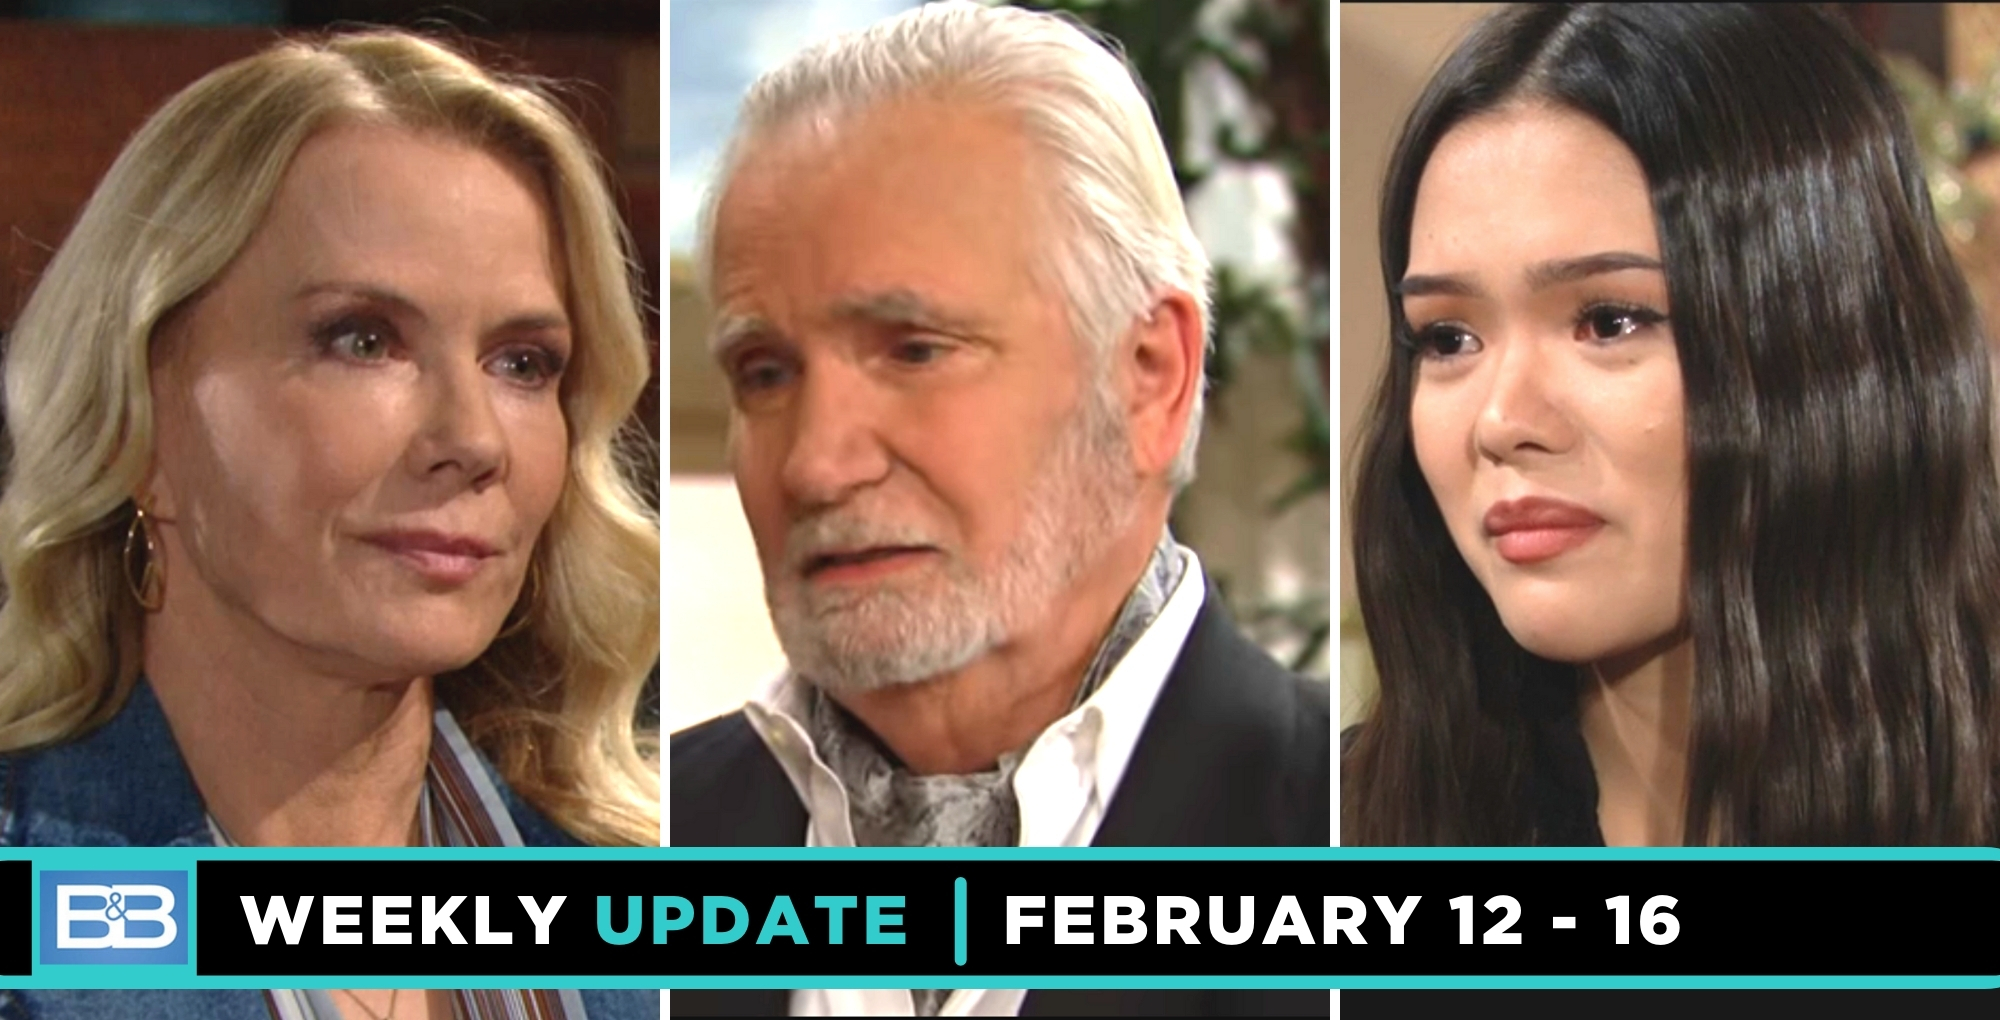 b&b spoilers weekly update for february 12 - 16 features brooke, eric, and luna.